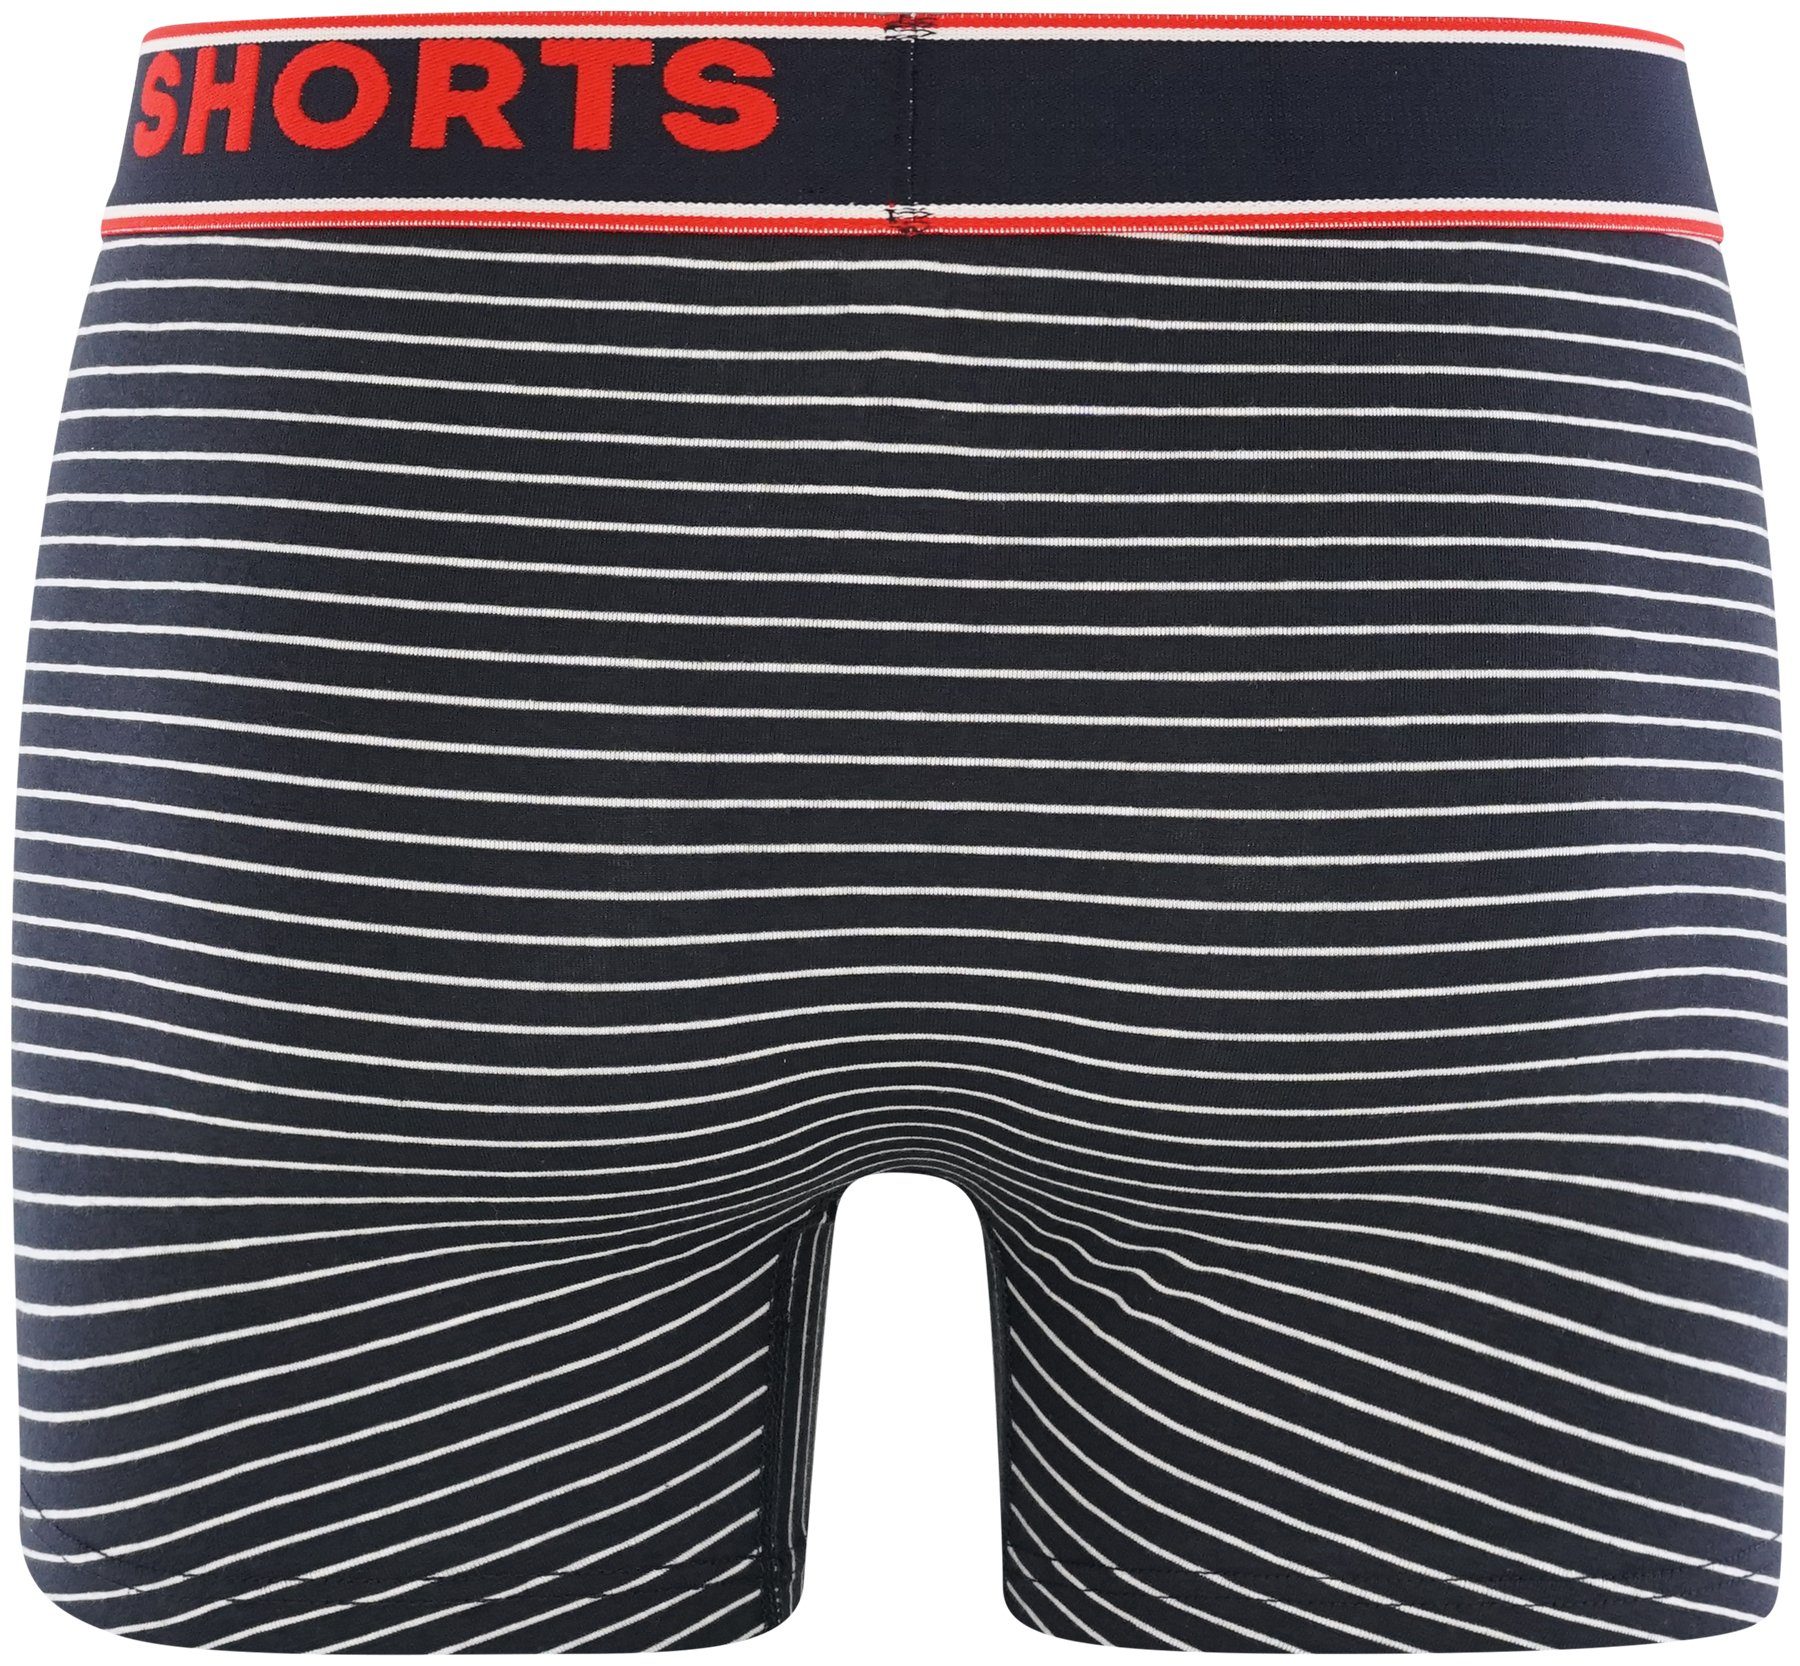 HAPPY SHORTS Retro Pants 2-Pack (2-St) Strawberries and Trunks Stripe